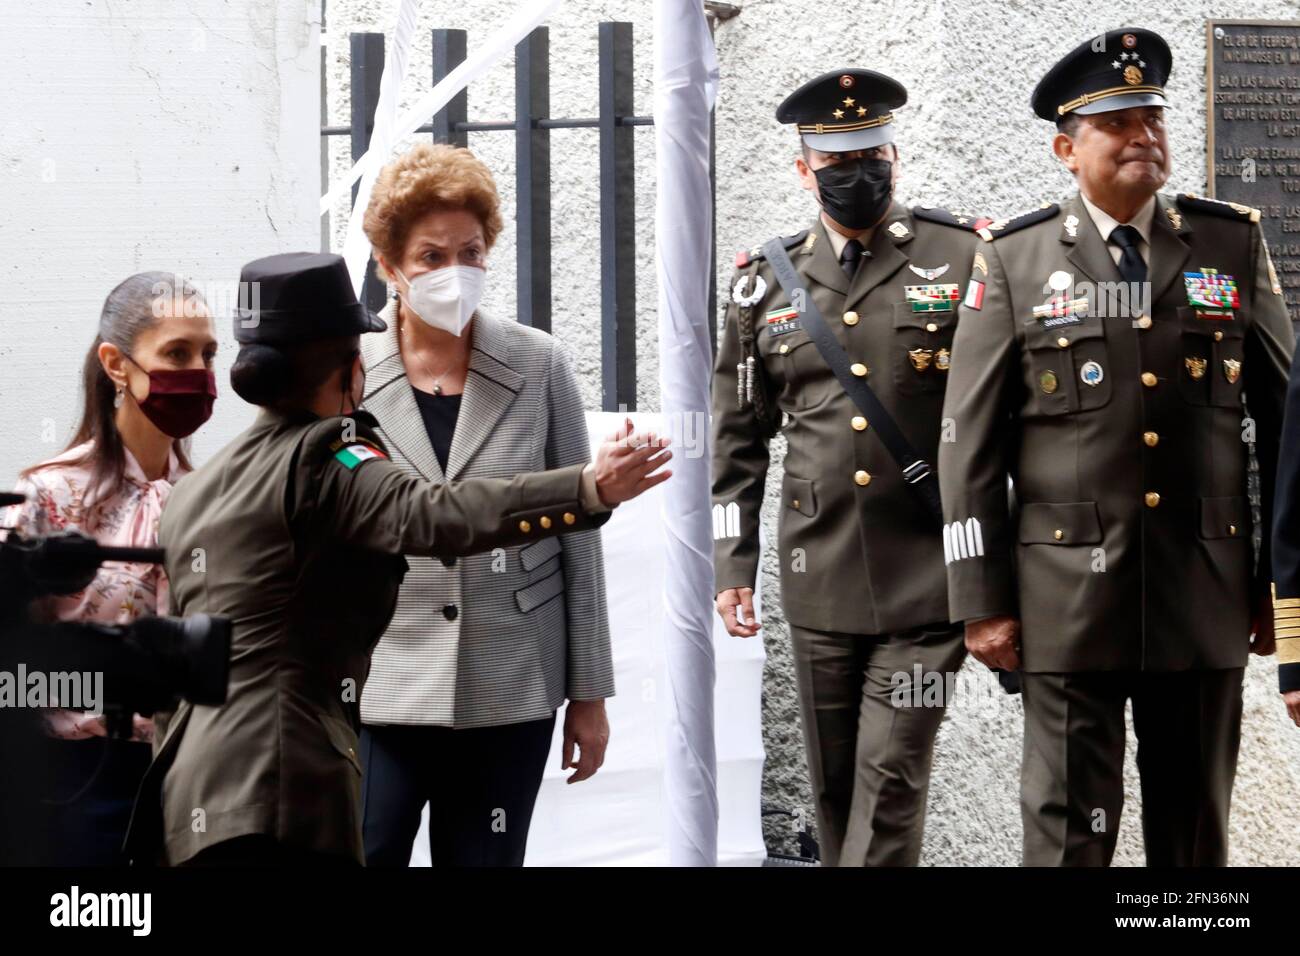 Mexico City, Mexico. 13th May, 2021. MEXICO CITY, MEXICO - MAY 13: Former president of Brazil, Dilma Rousseff, during ceremony for the 700 years of the founding of Tenochtitlan at the Museo del Templo Mayor on May 13, 2021 in Mexico City, Mexico. (Photo by Eyepix/Sipa USA) Credit: Sipa USA/Alamy Live News Stock Photo